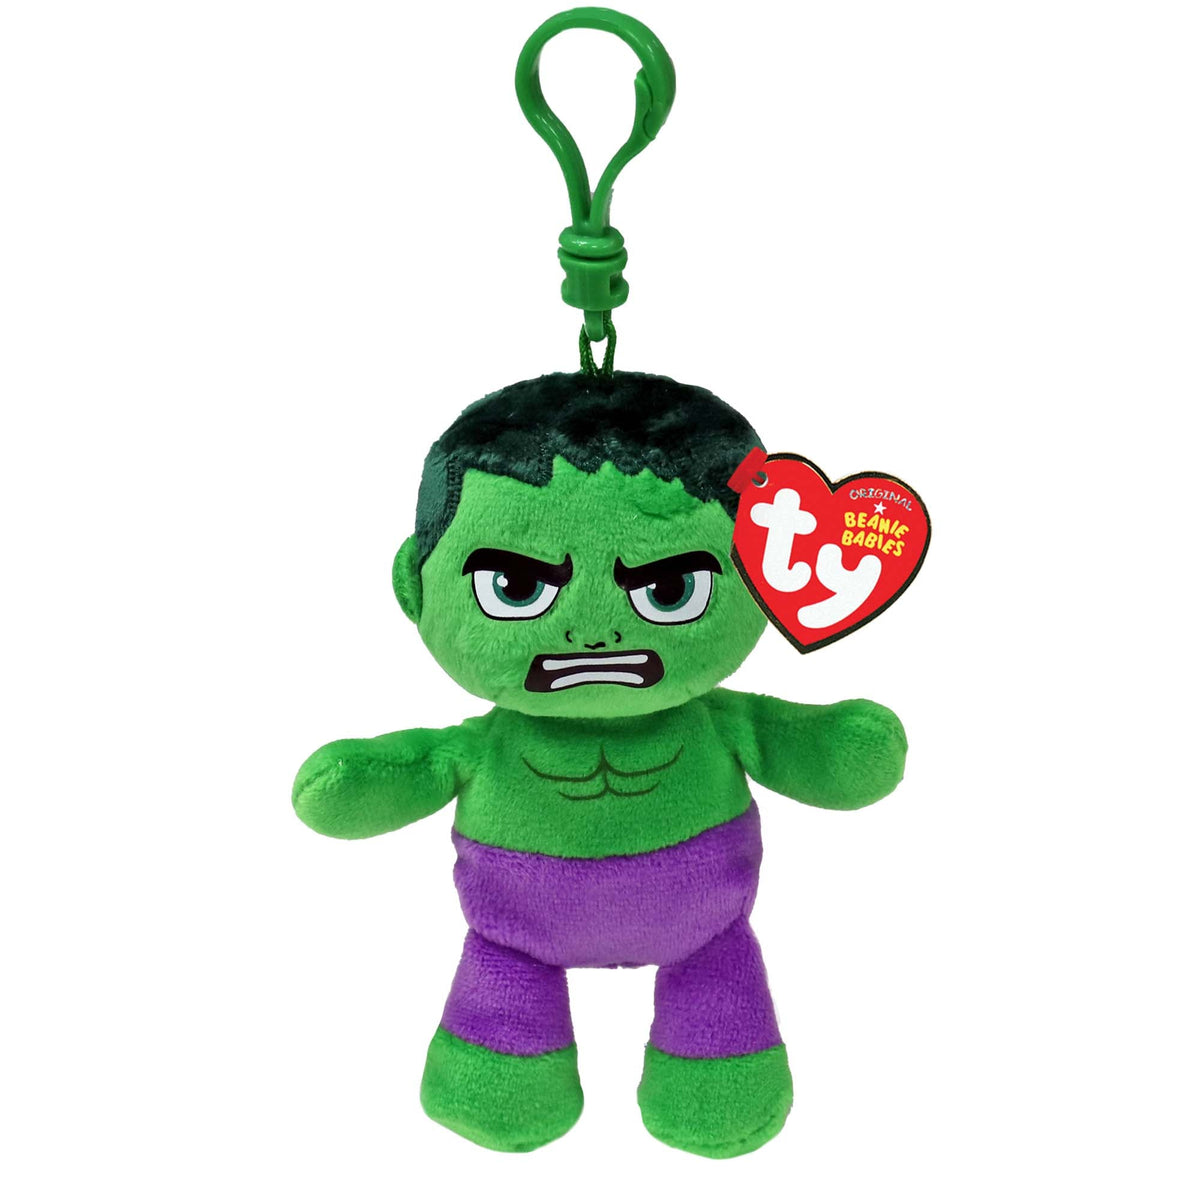 TY INC Plushes Marvel TY Beanie Boos Plush with Clip, Hulk, 5 Inches, 1 Count